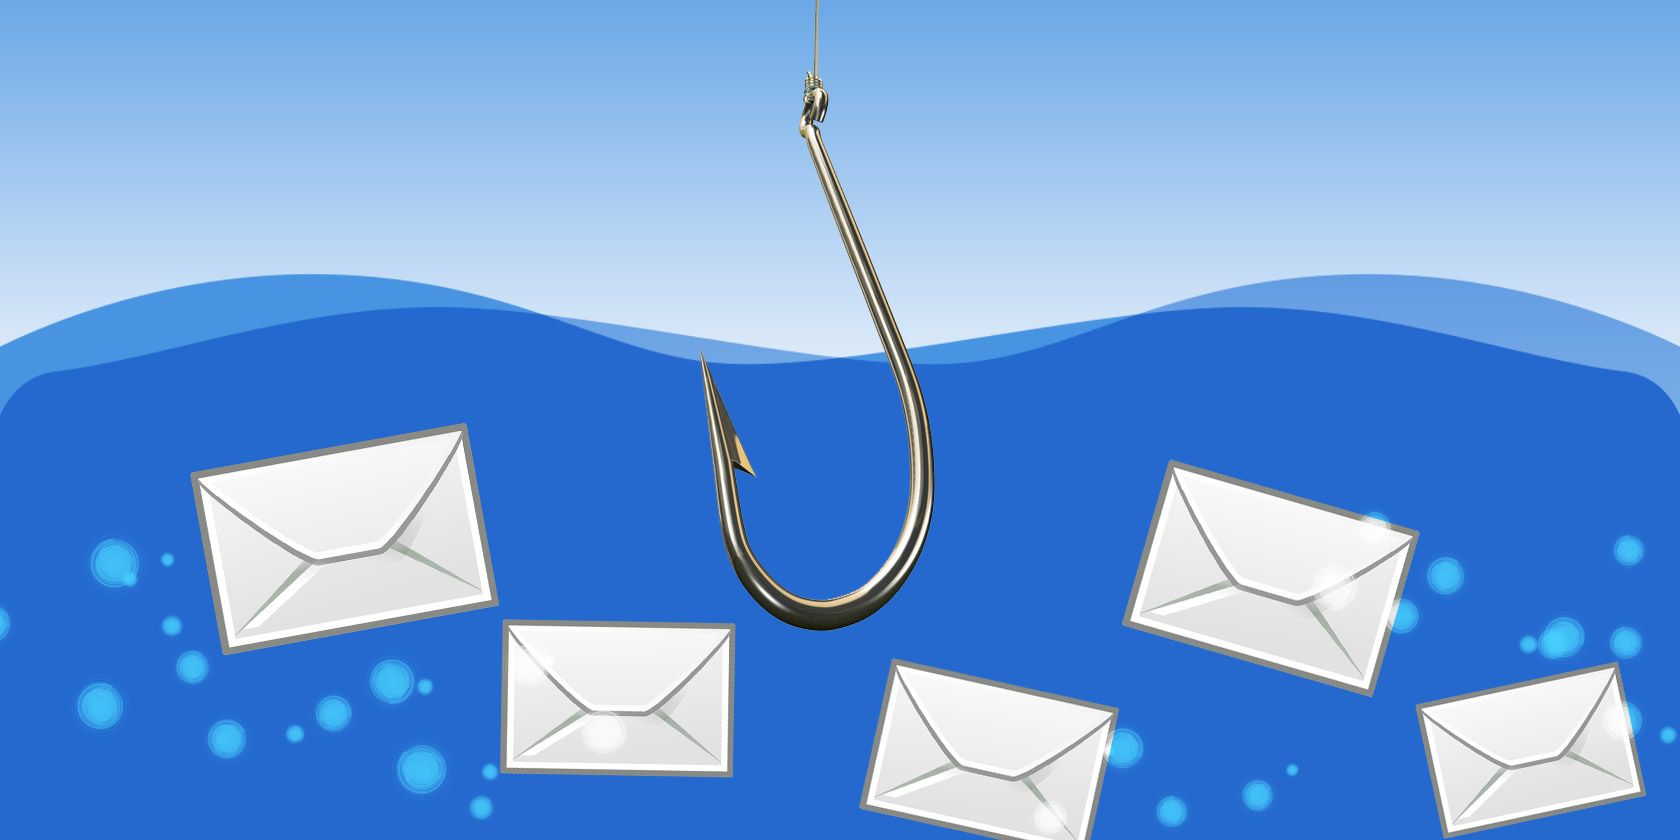 A hook trying to phish emails 